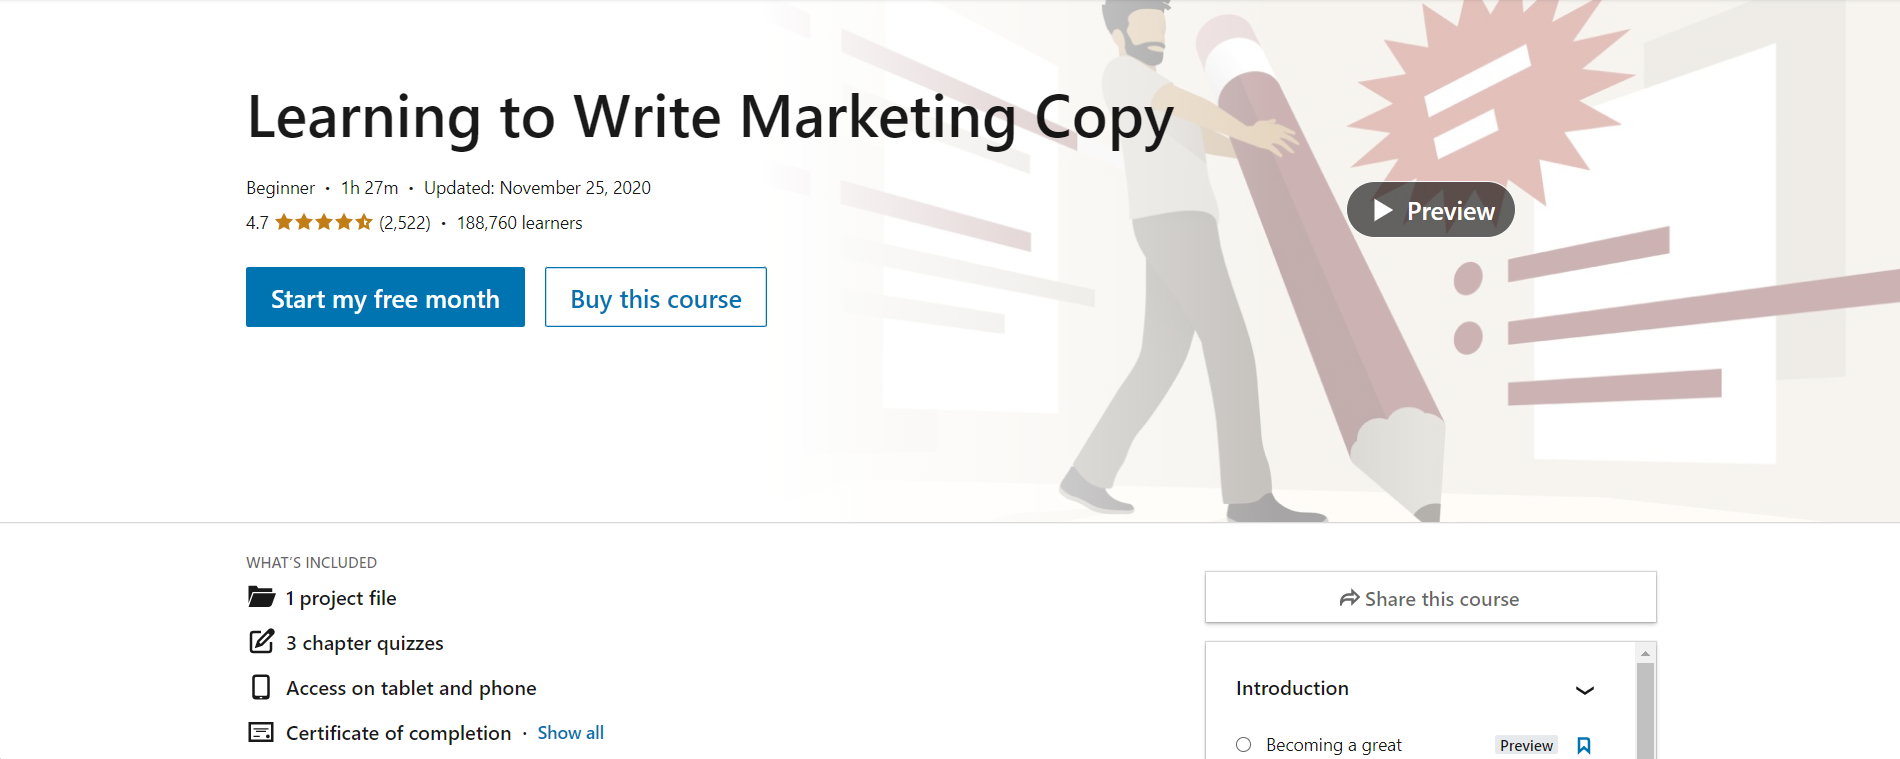 Learning to Write Marketing Copy